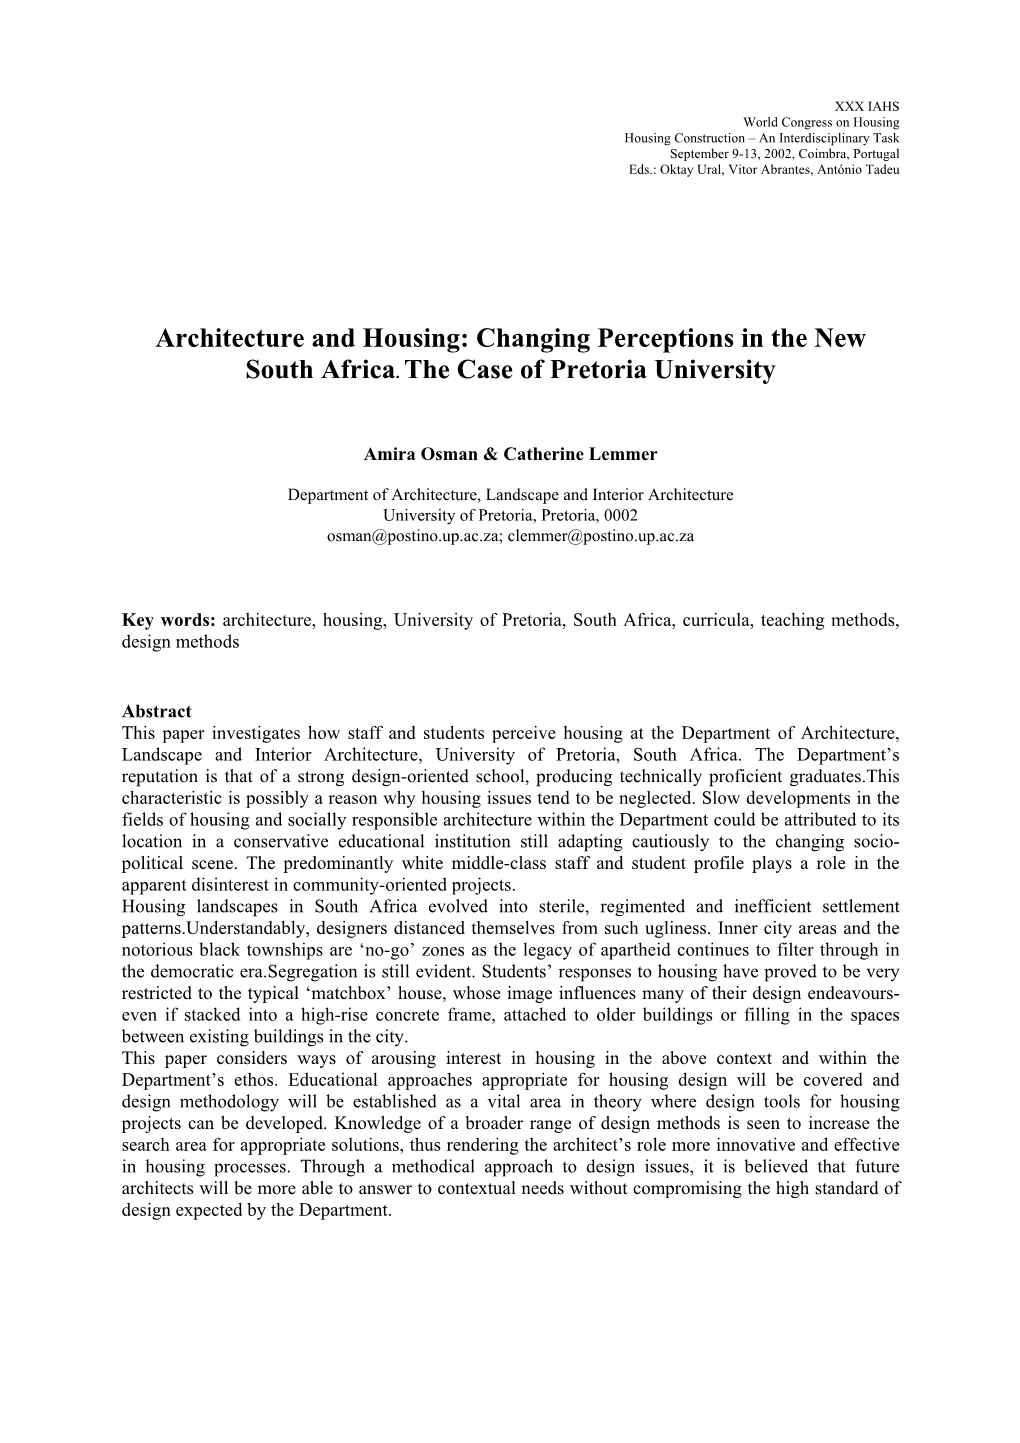 Architecture and Housing: Changing Perceptions in the New South Africa